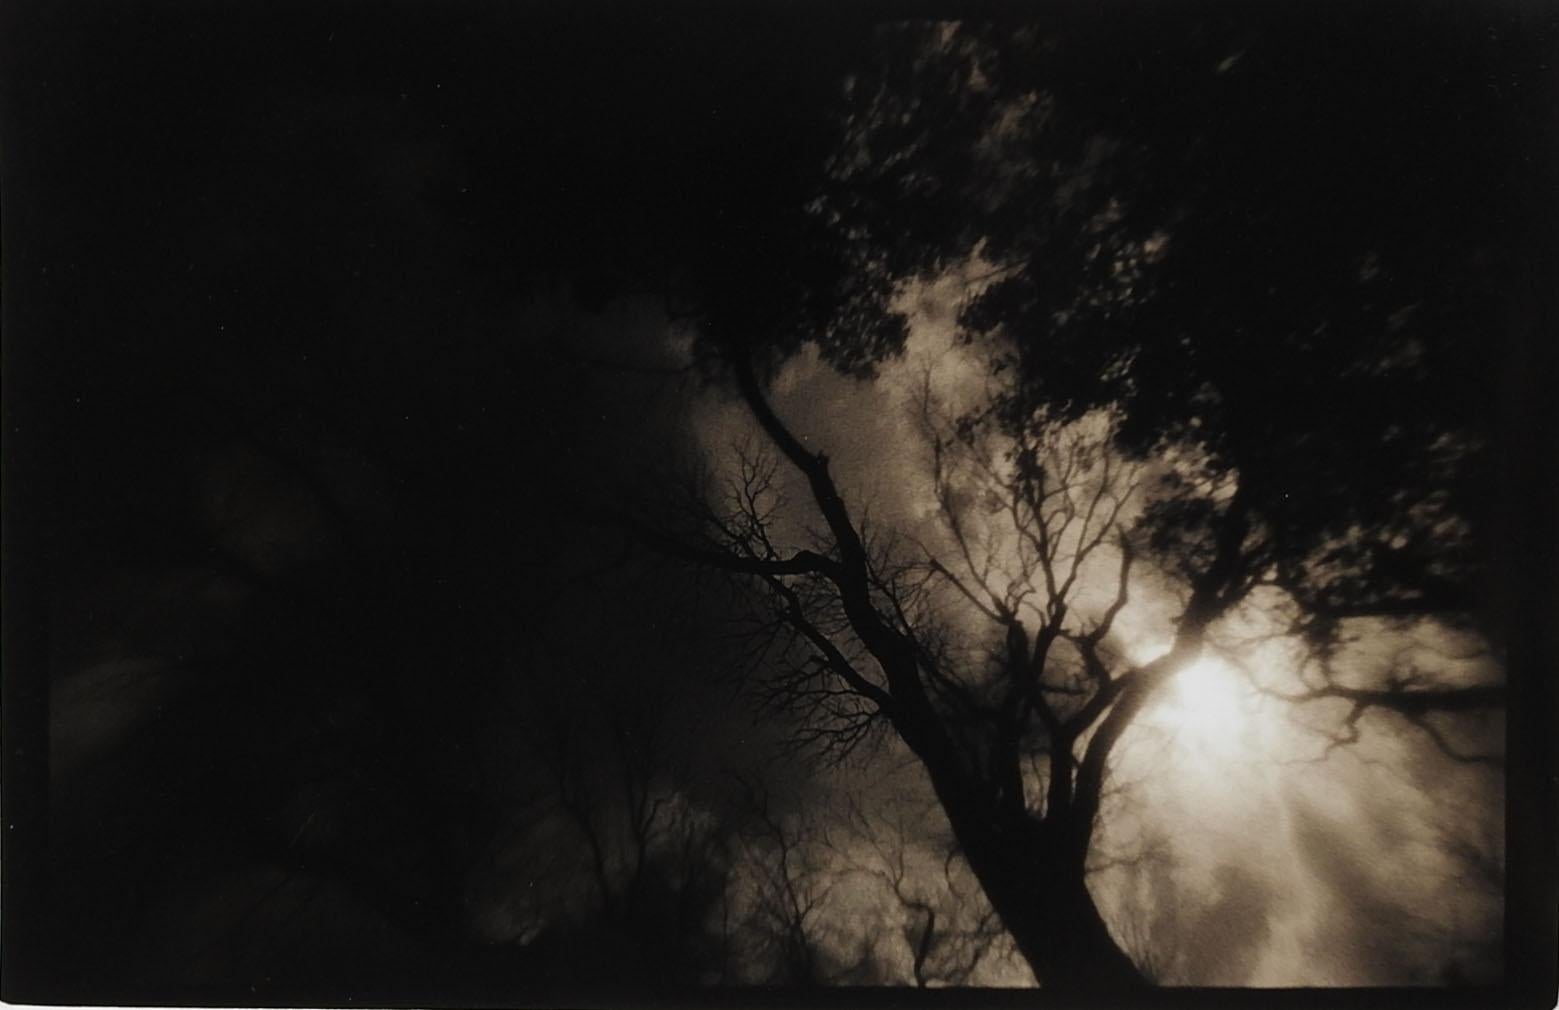 Rustic Vintage 1990's Sepia Toned Moody Sun & Tree Photograph For Sale